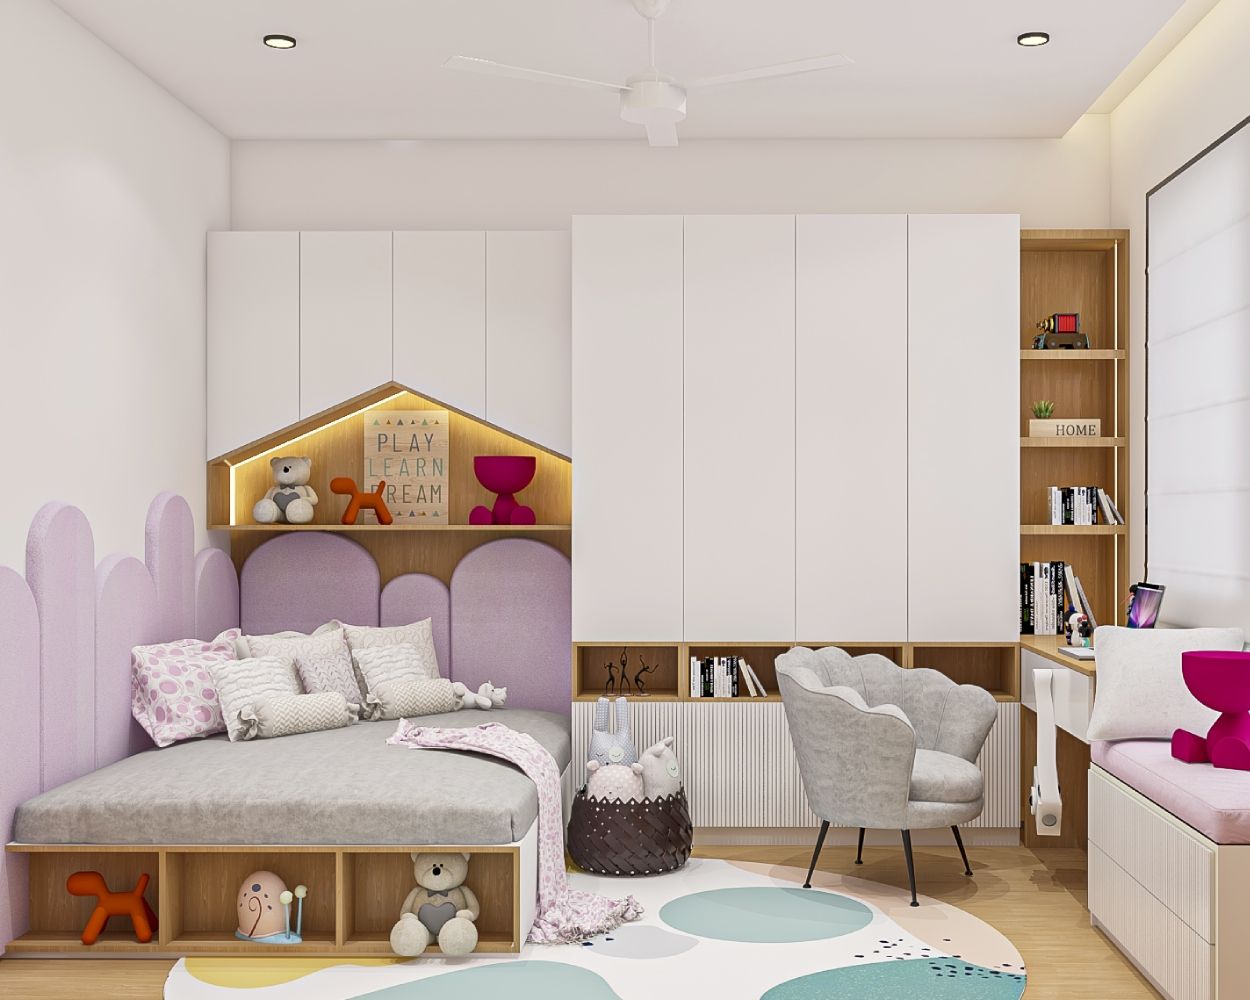 Contemporary Kids Room Design For Girls With A Wooden Bed And A Study Unit